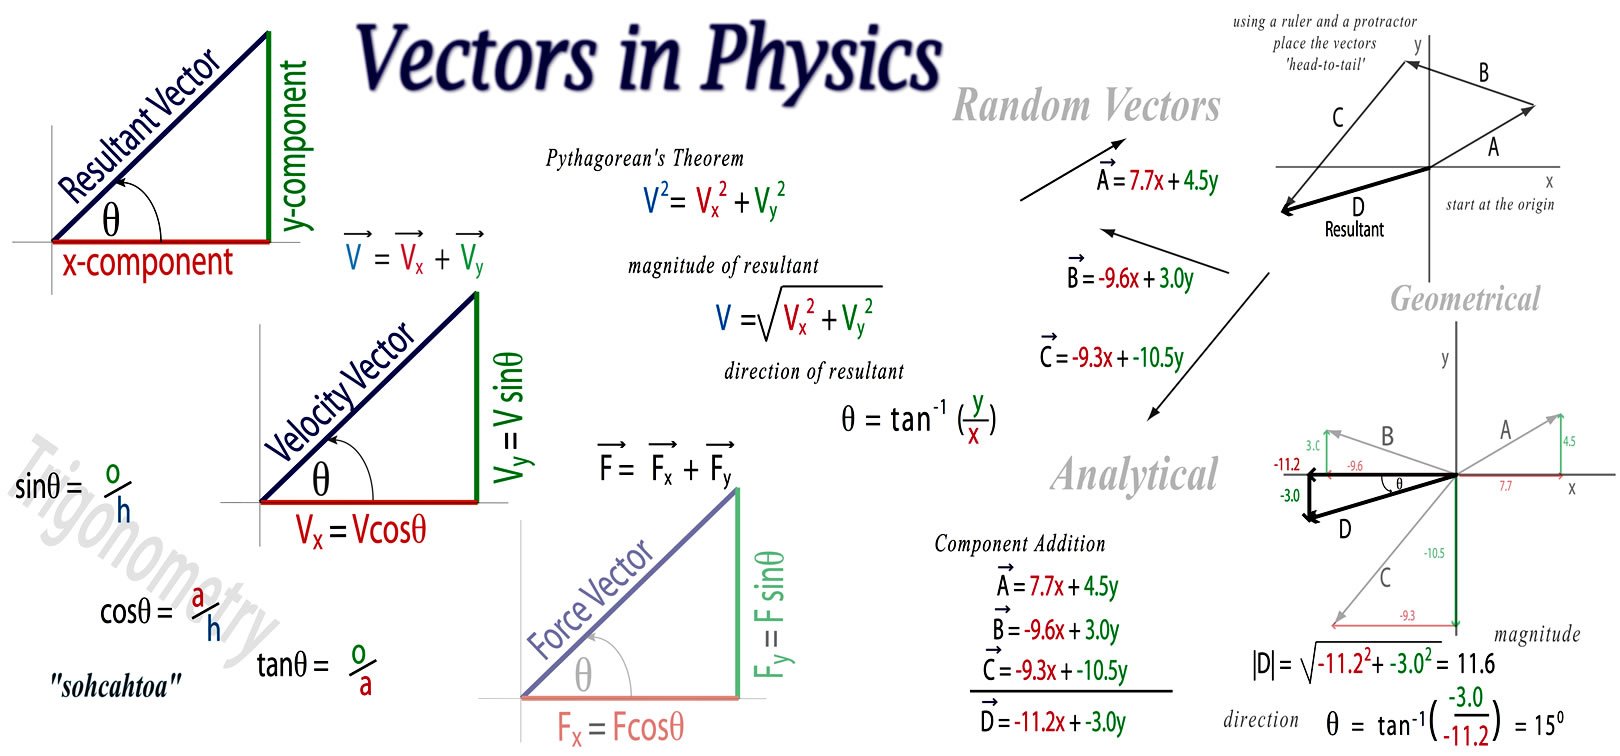 Information about Vectors in Physics?